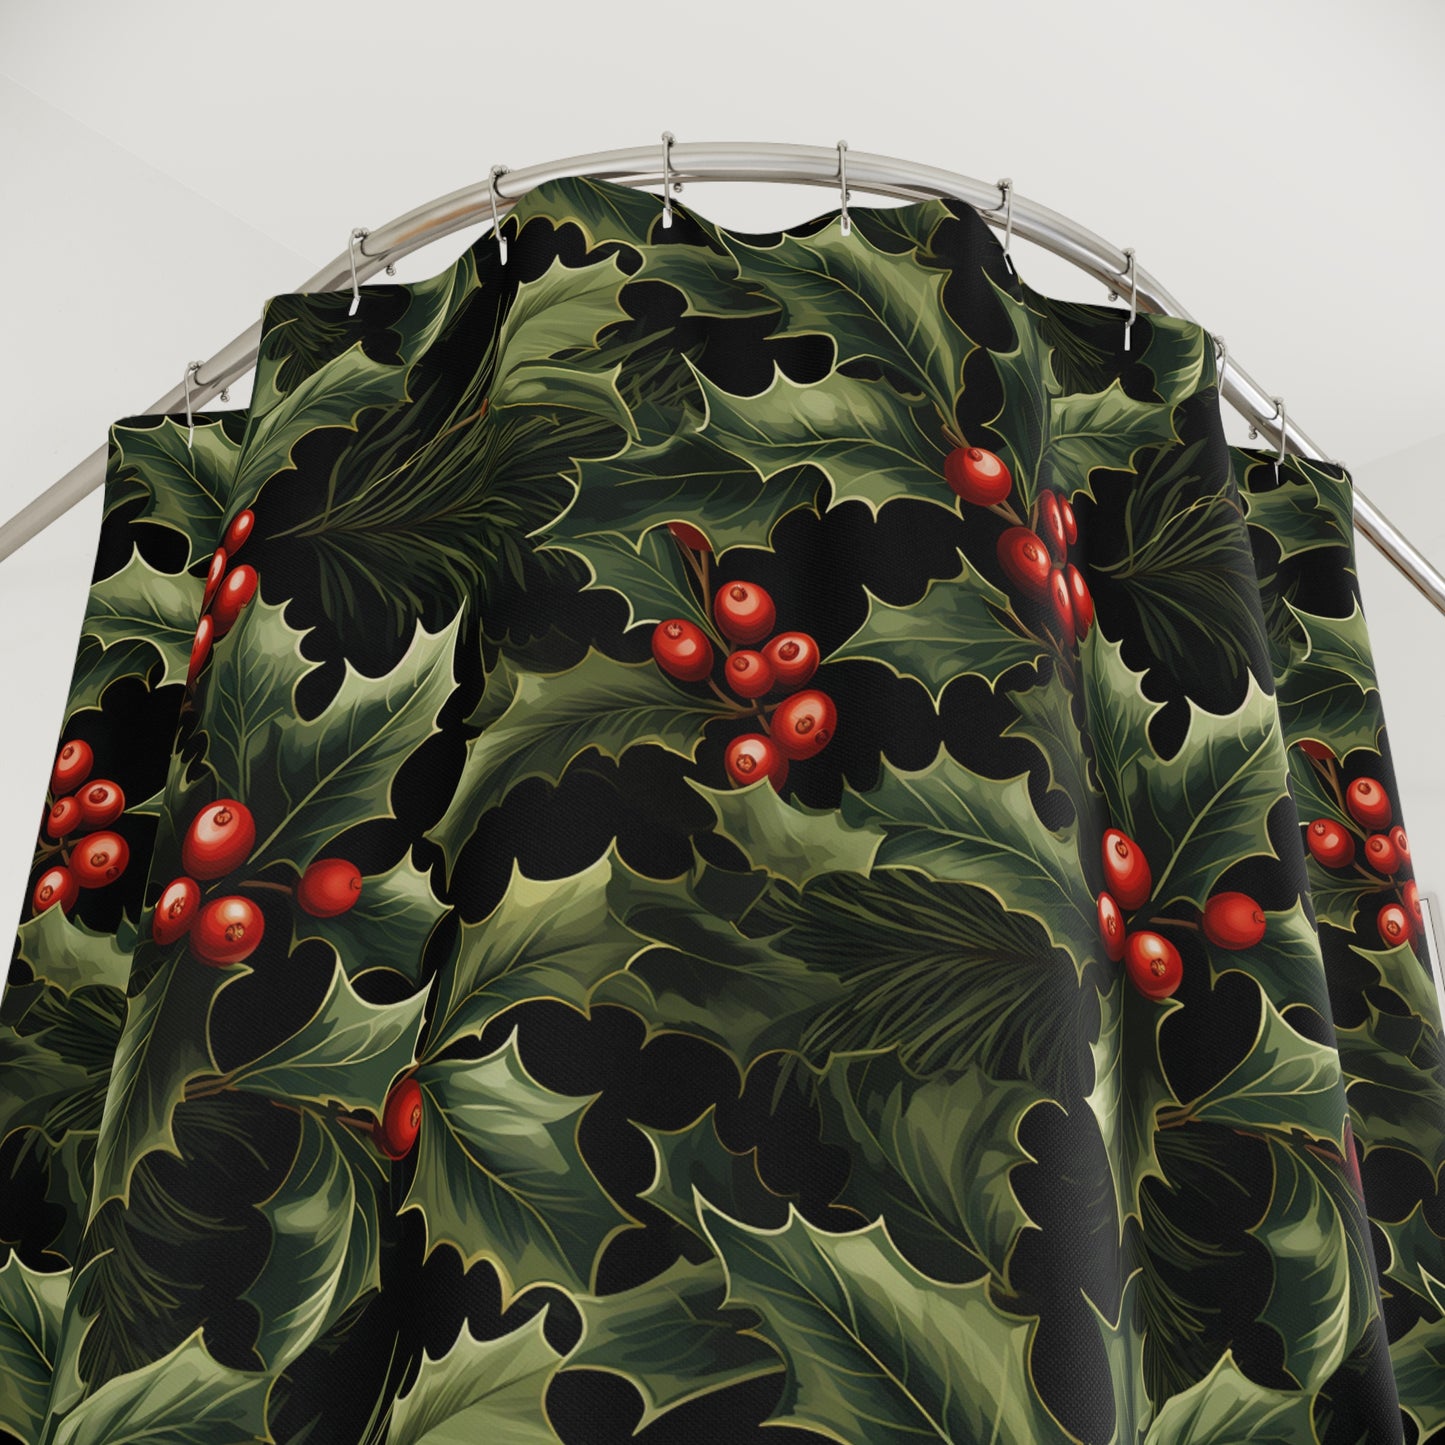 Shower Curtain (Boughs of Holly)